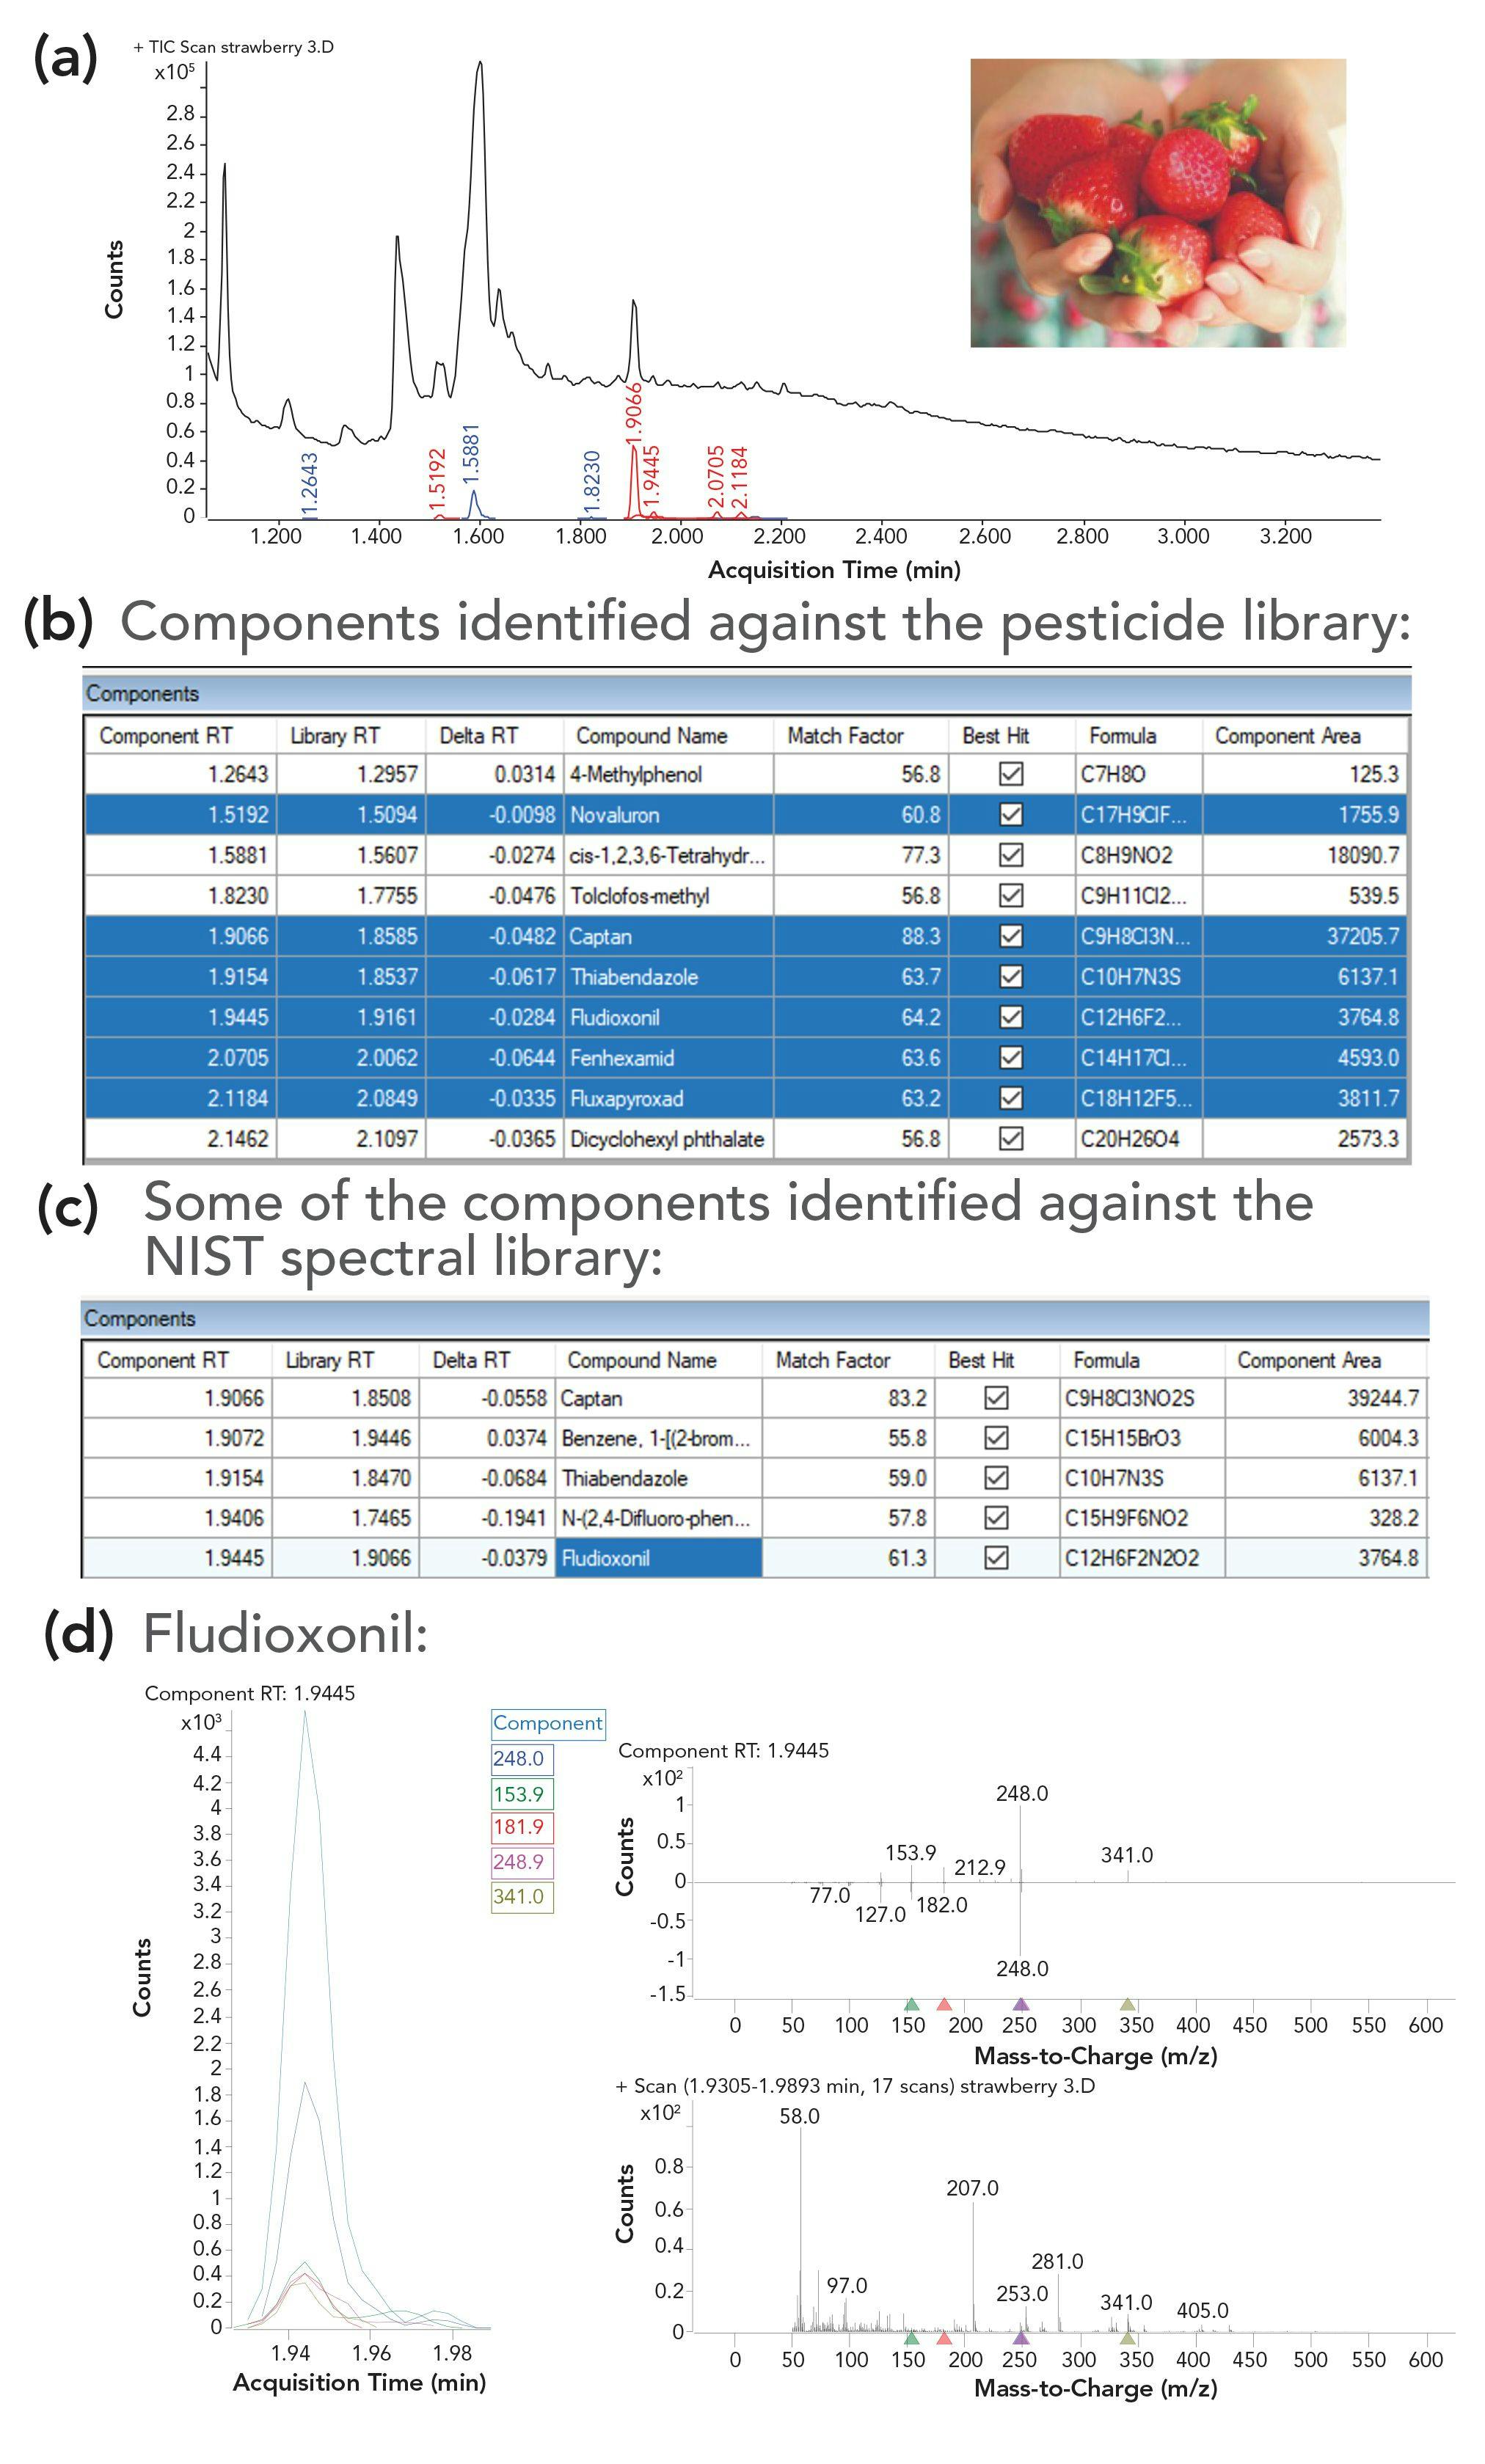 FIGURE 2: (a) Screening results for strawberry rinsate identified against (b) the pesticide and (c) the NIST spectral libraries, featuring (d) identification of fludioxonil.